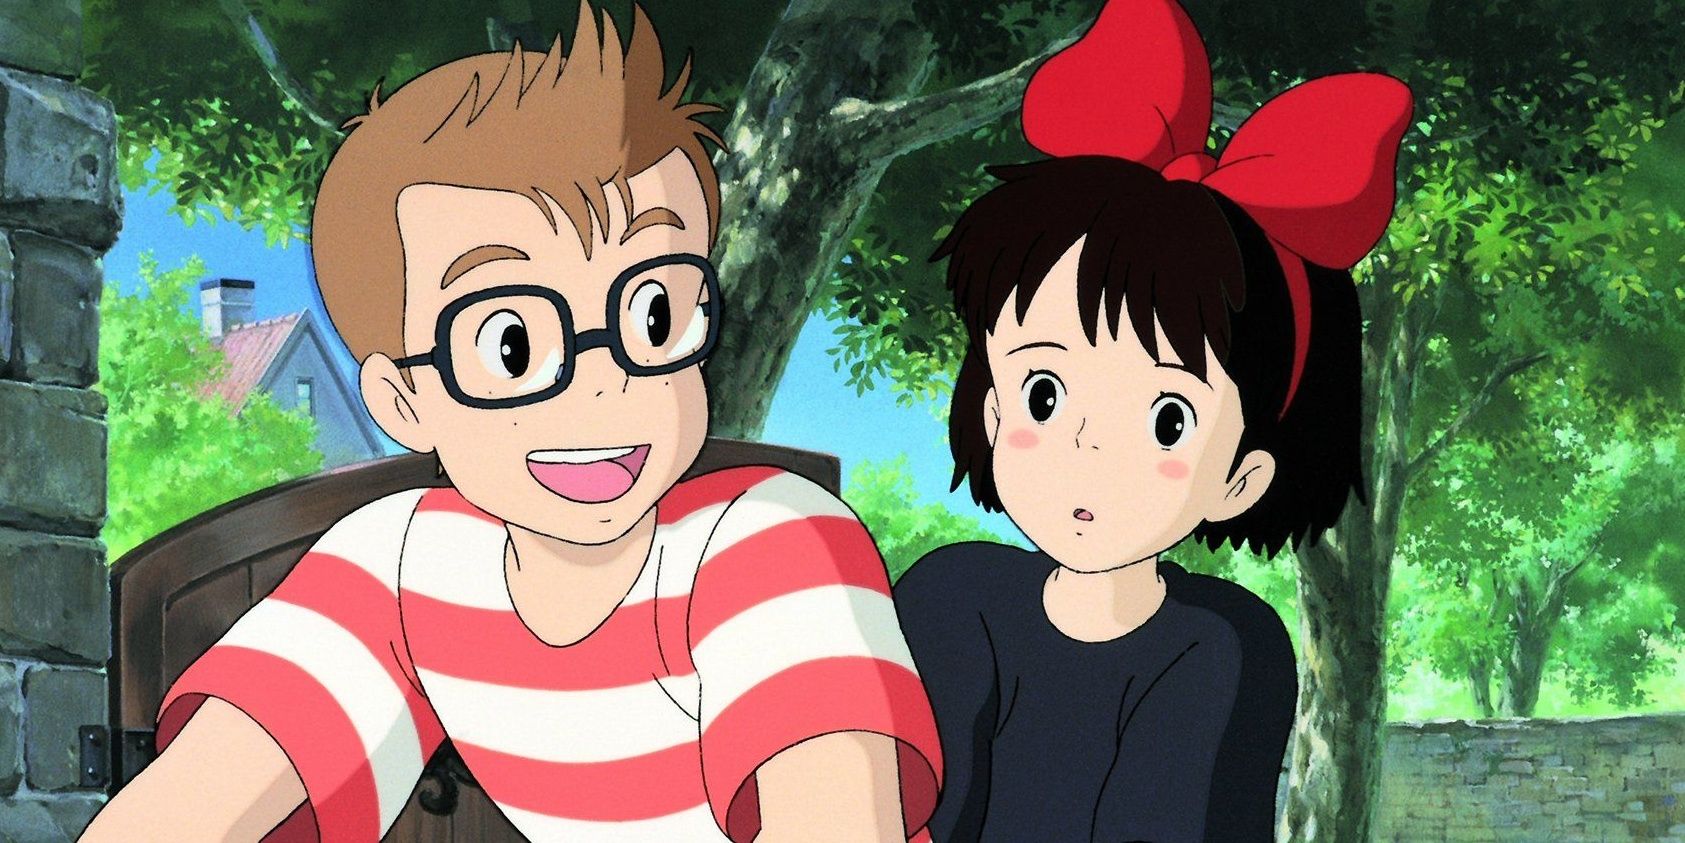 Kiki and Tombo smile and ride a bike from Kiki's Delivery Service